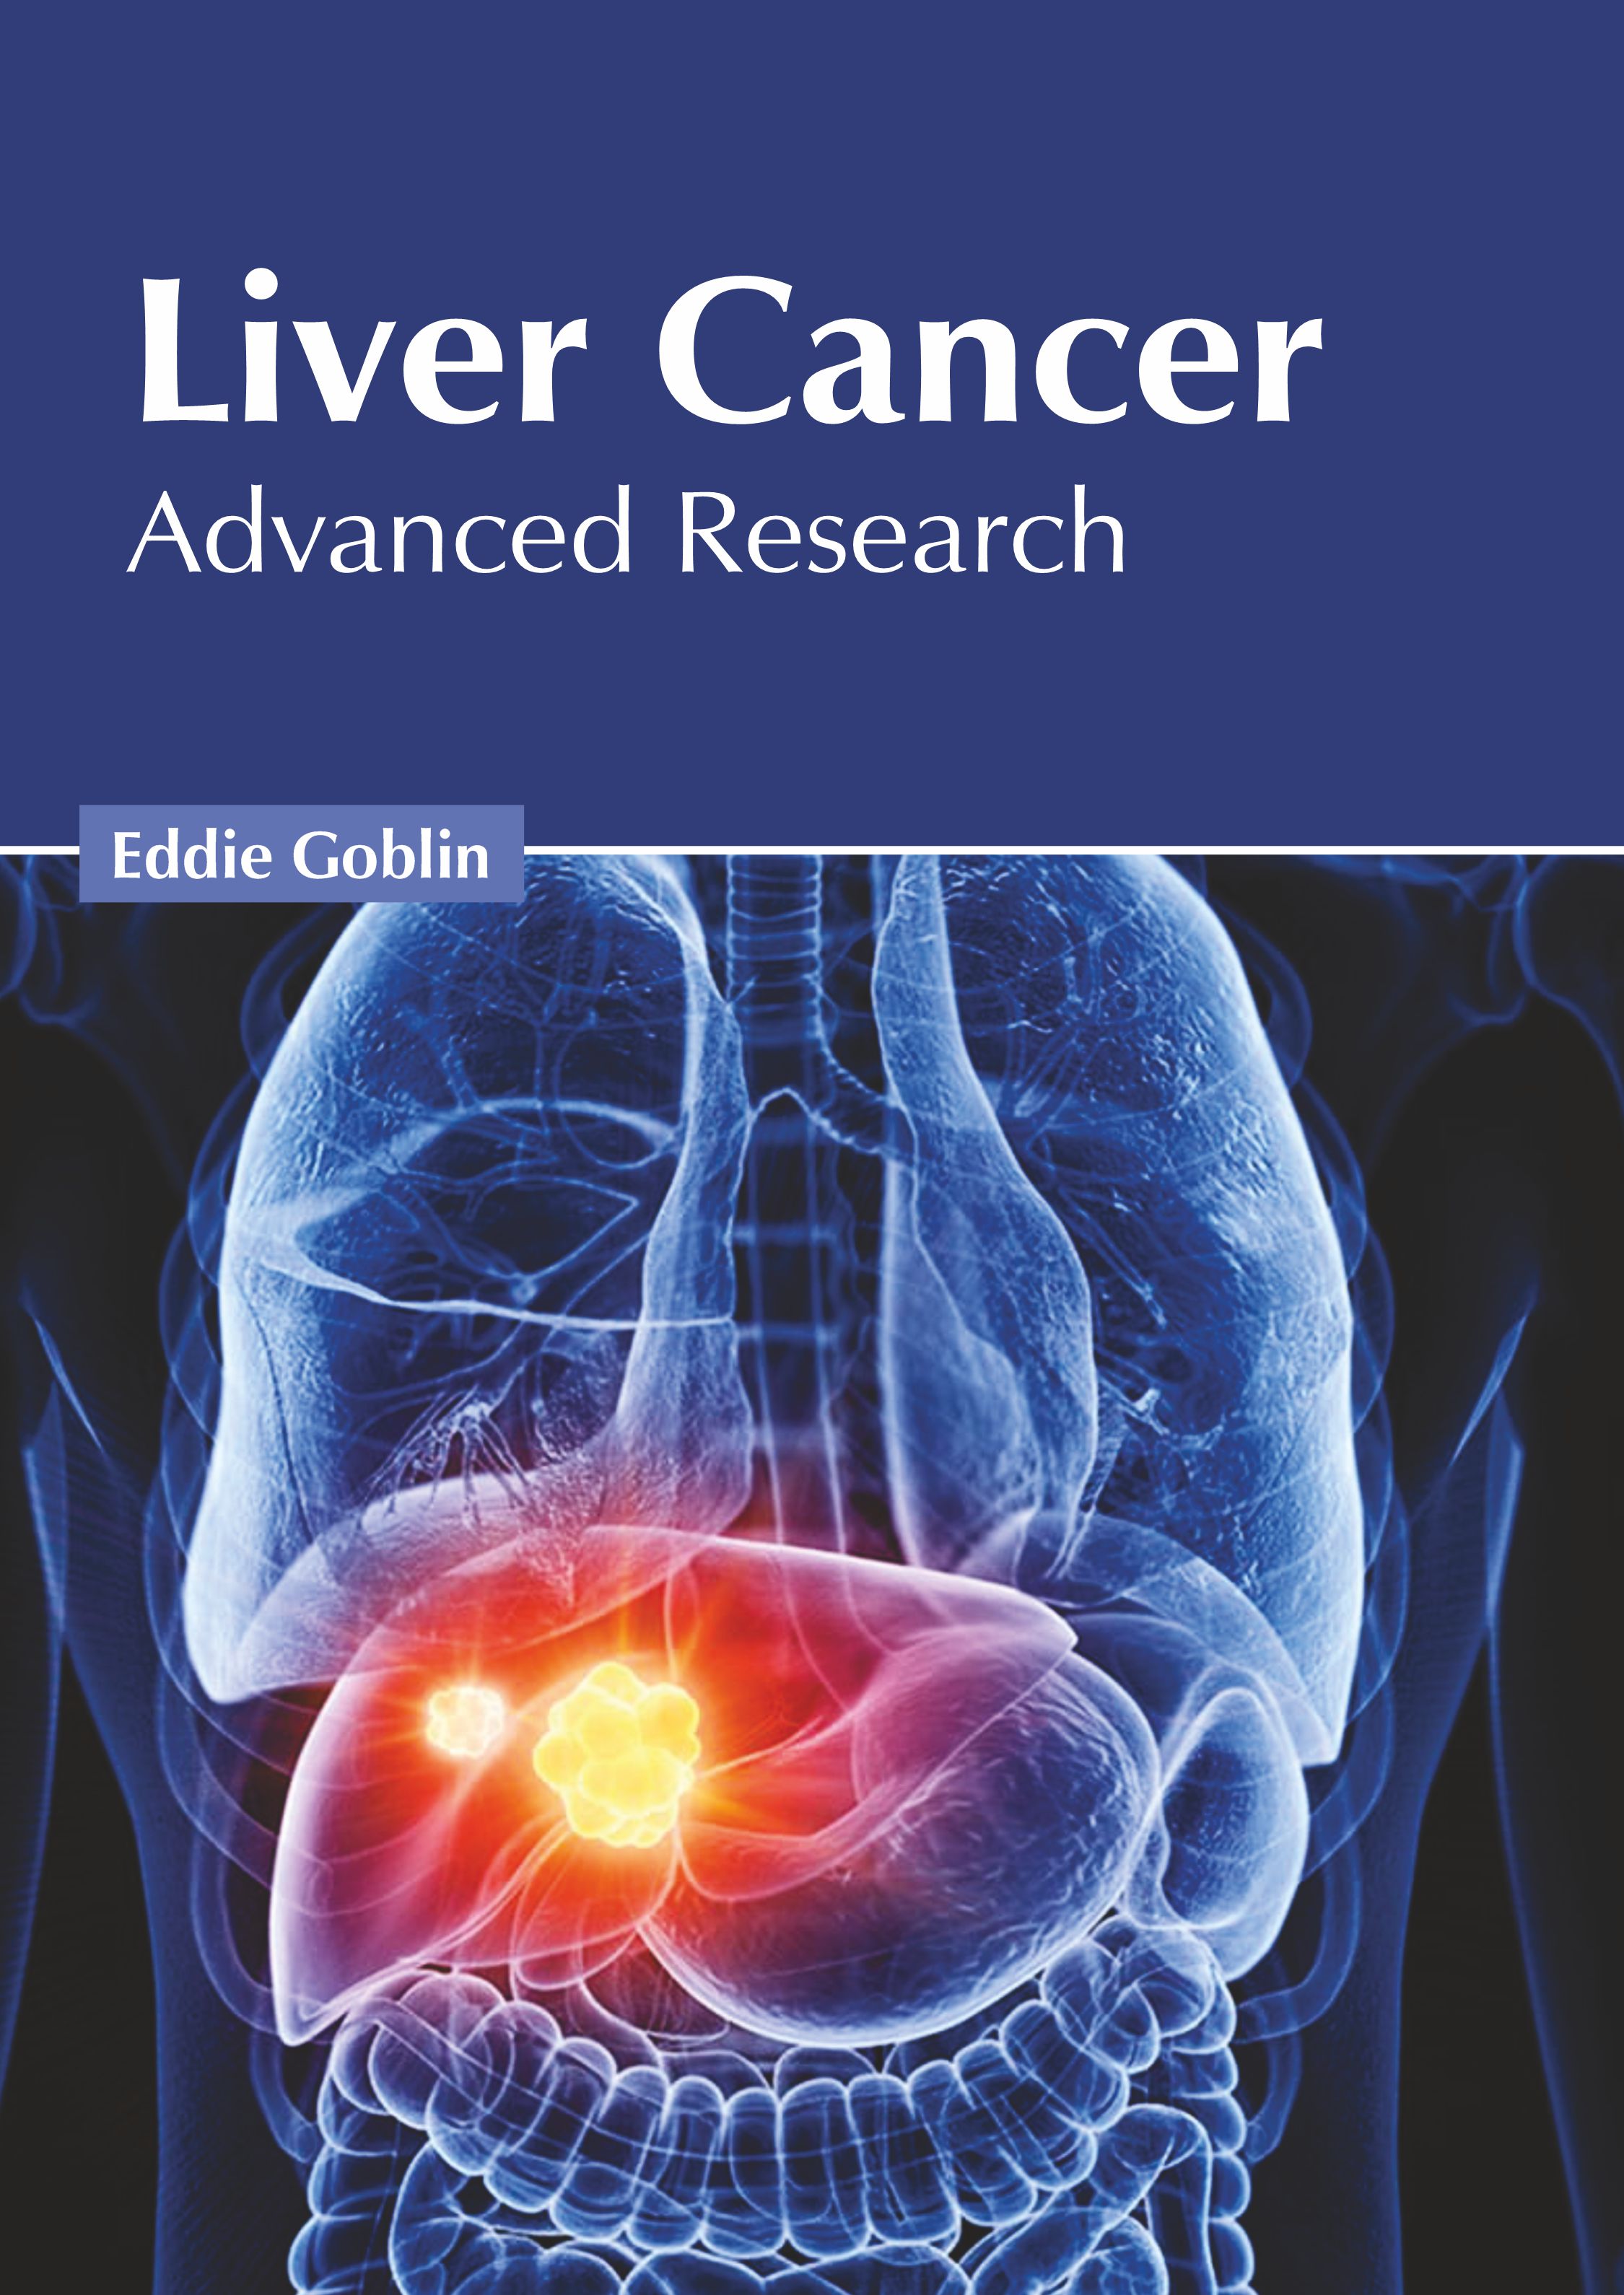 LIVER CANCER: ADVANCED RESEARCH